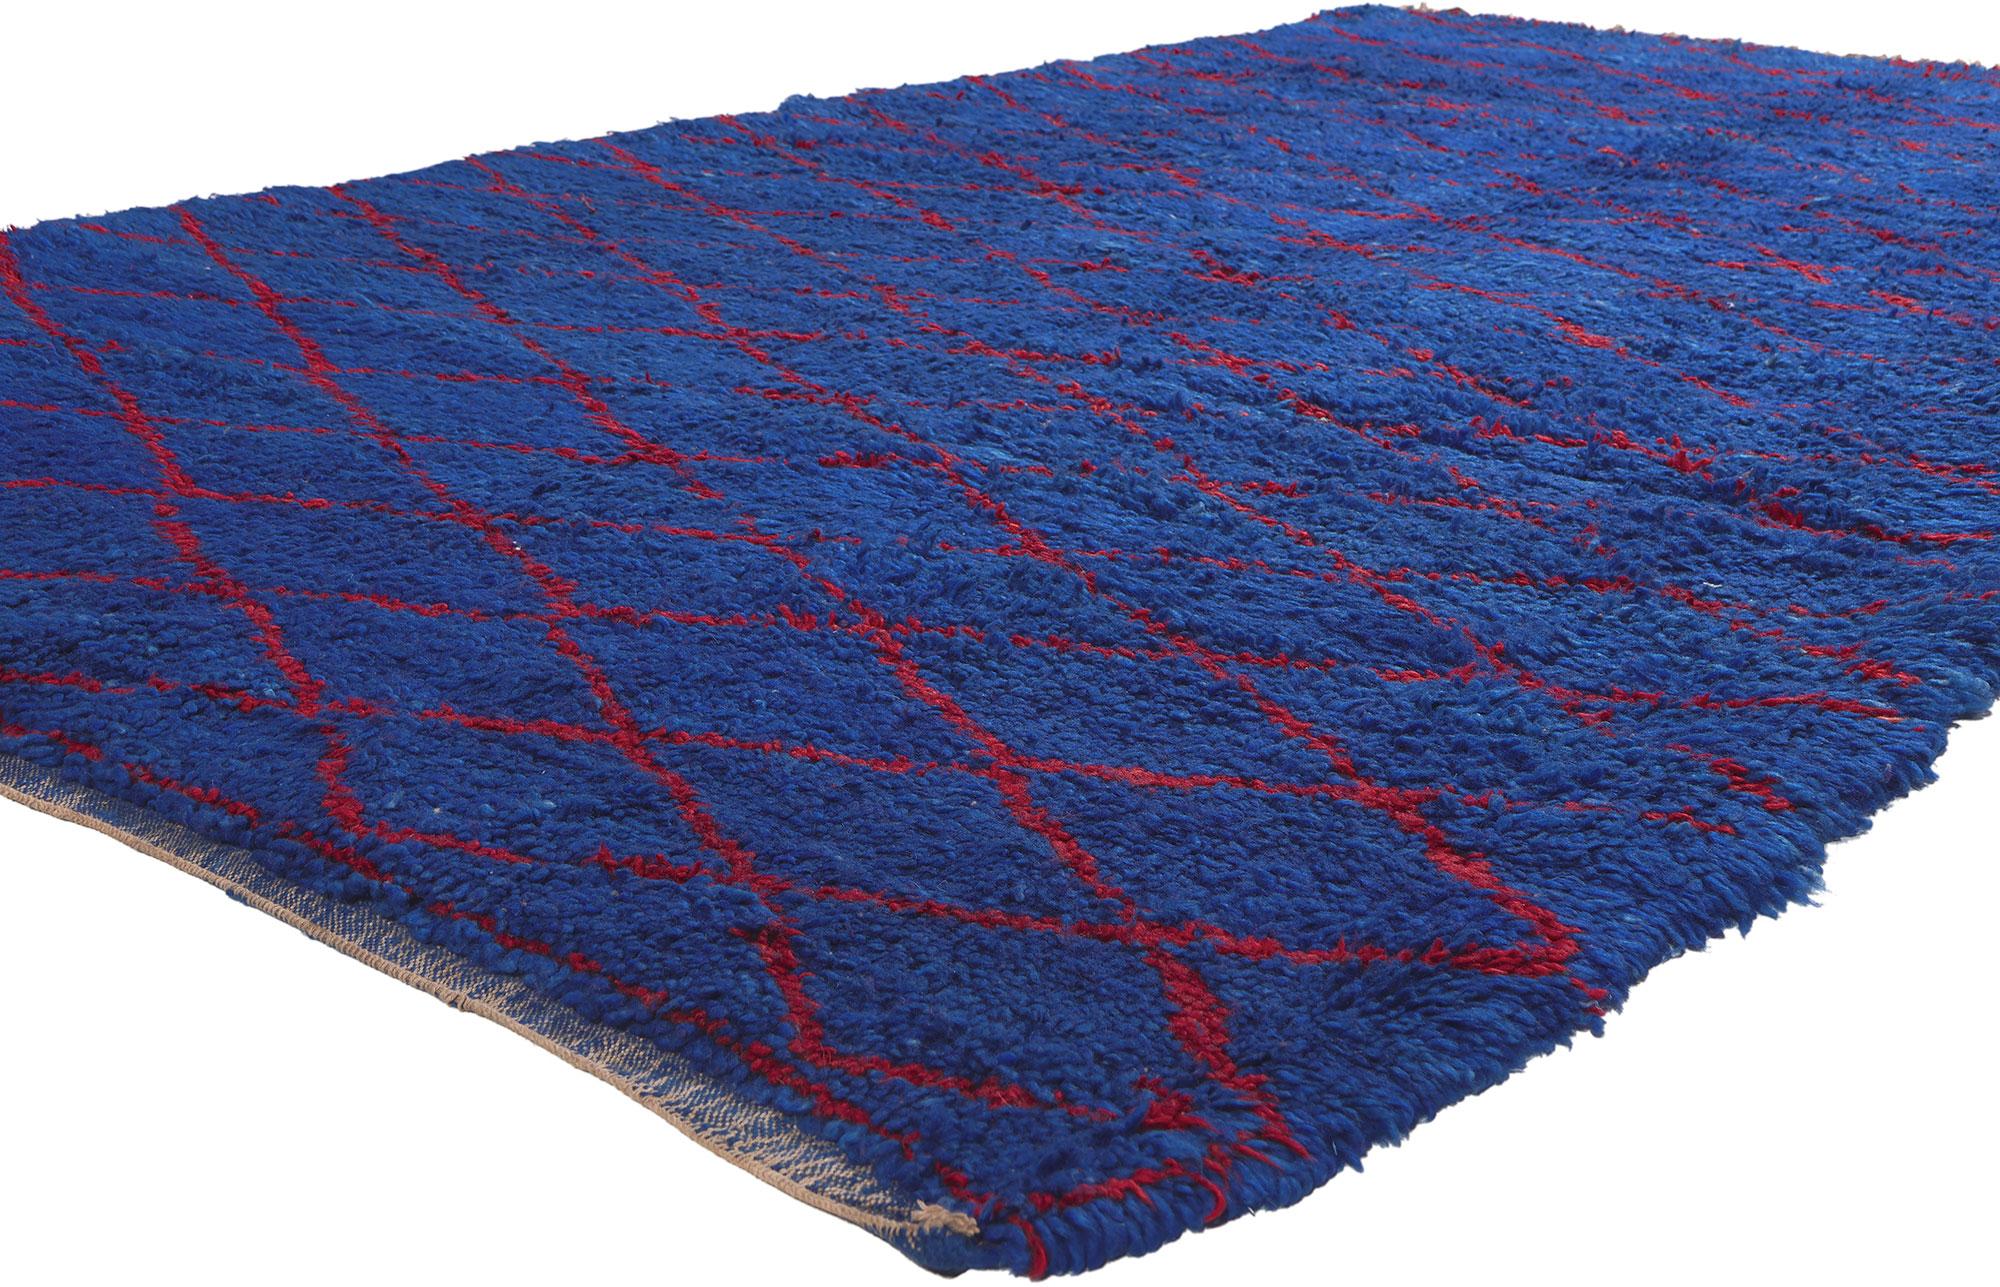 20934 Vintage Blue Beni MGuild Moroccan Rug, 06'01 x 10'05. Embark on a captivating visual journey through the enchanting history of Moroccan culture with our hand-knotted Beni MGuild vintage rug—an extraordinary masterpiece seamlessly weaving